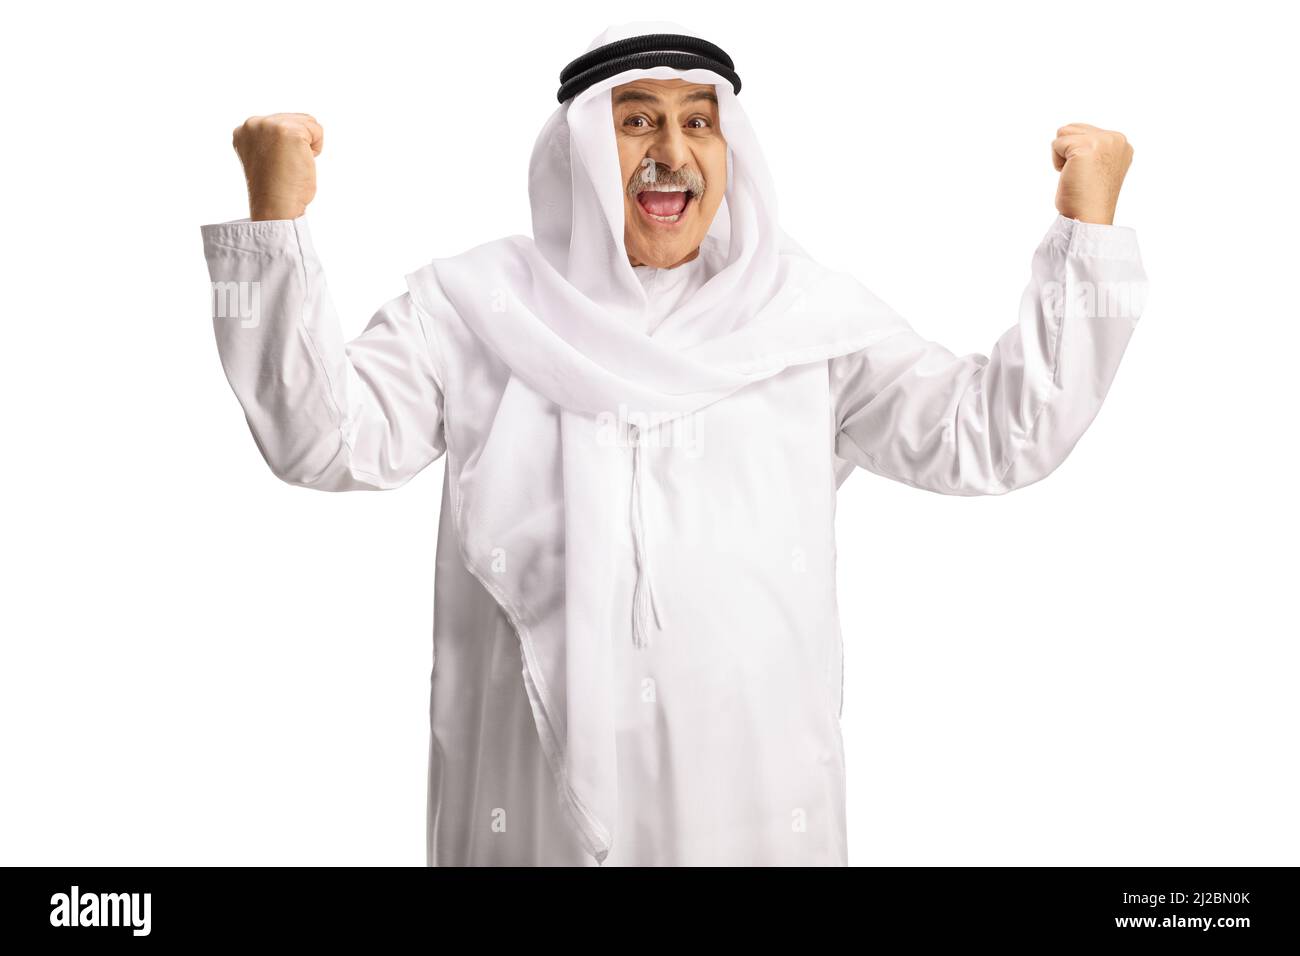 Excited arab man with wearing dishdasha and gesturing happiness isolted on white background Stock Photo